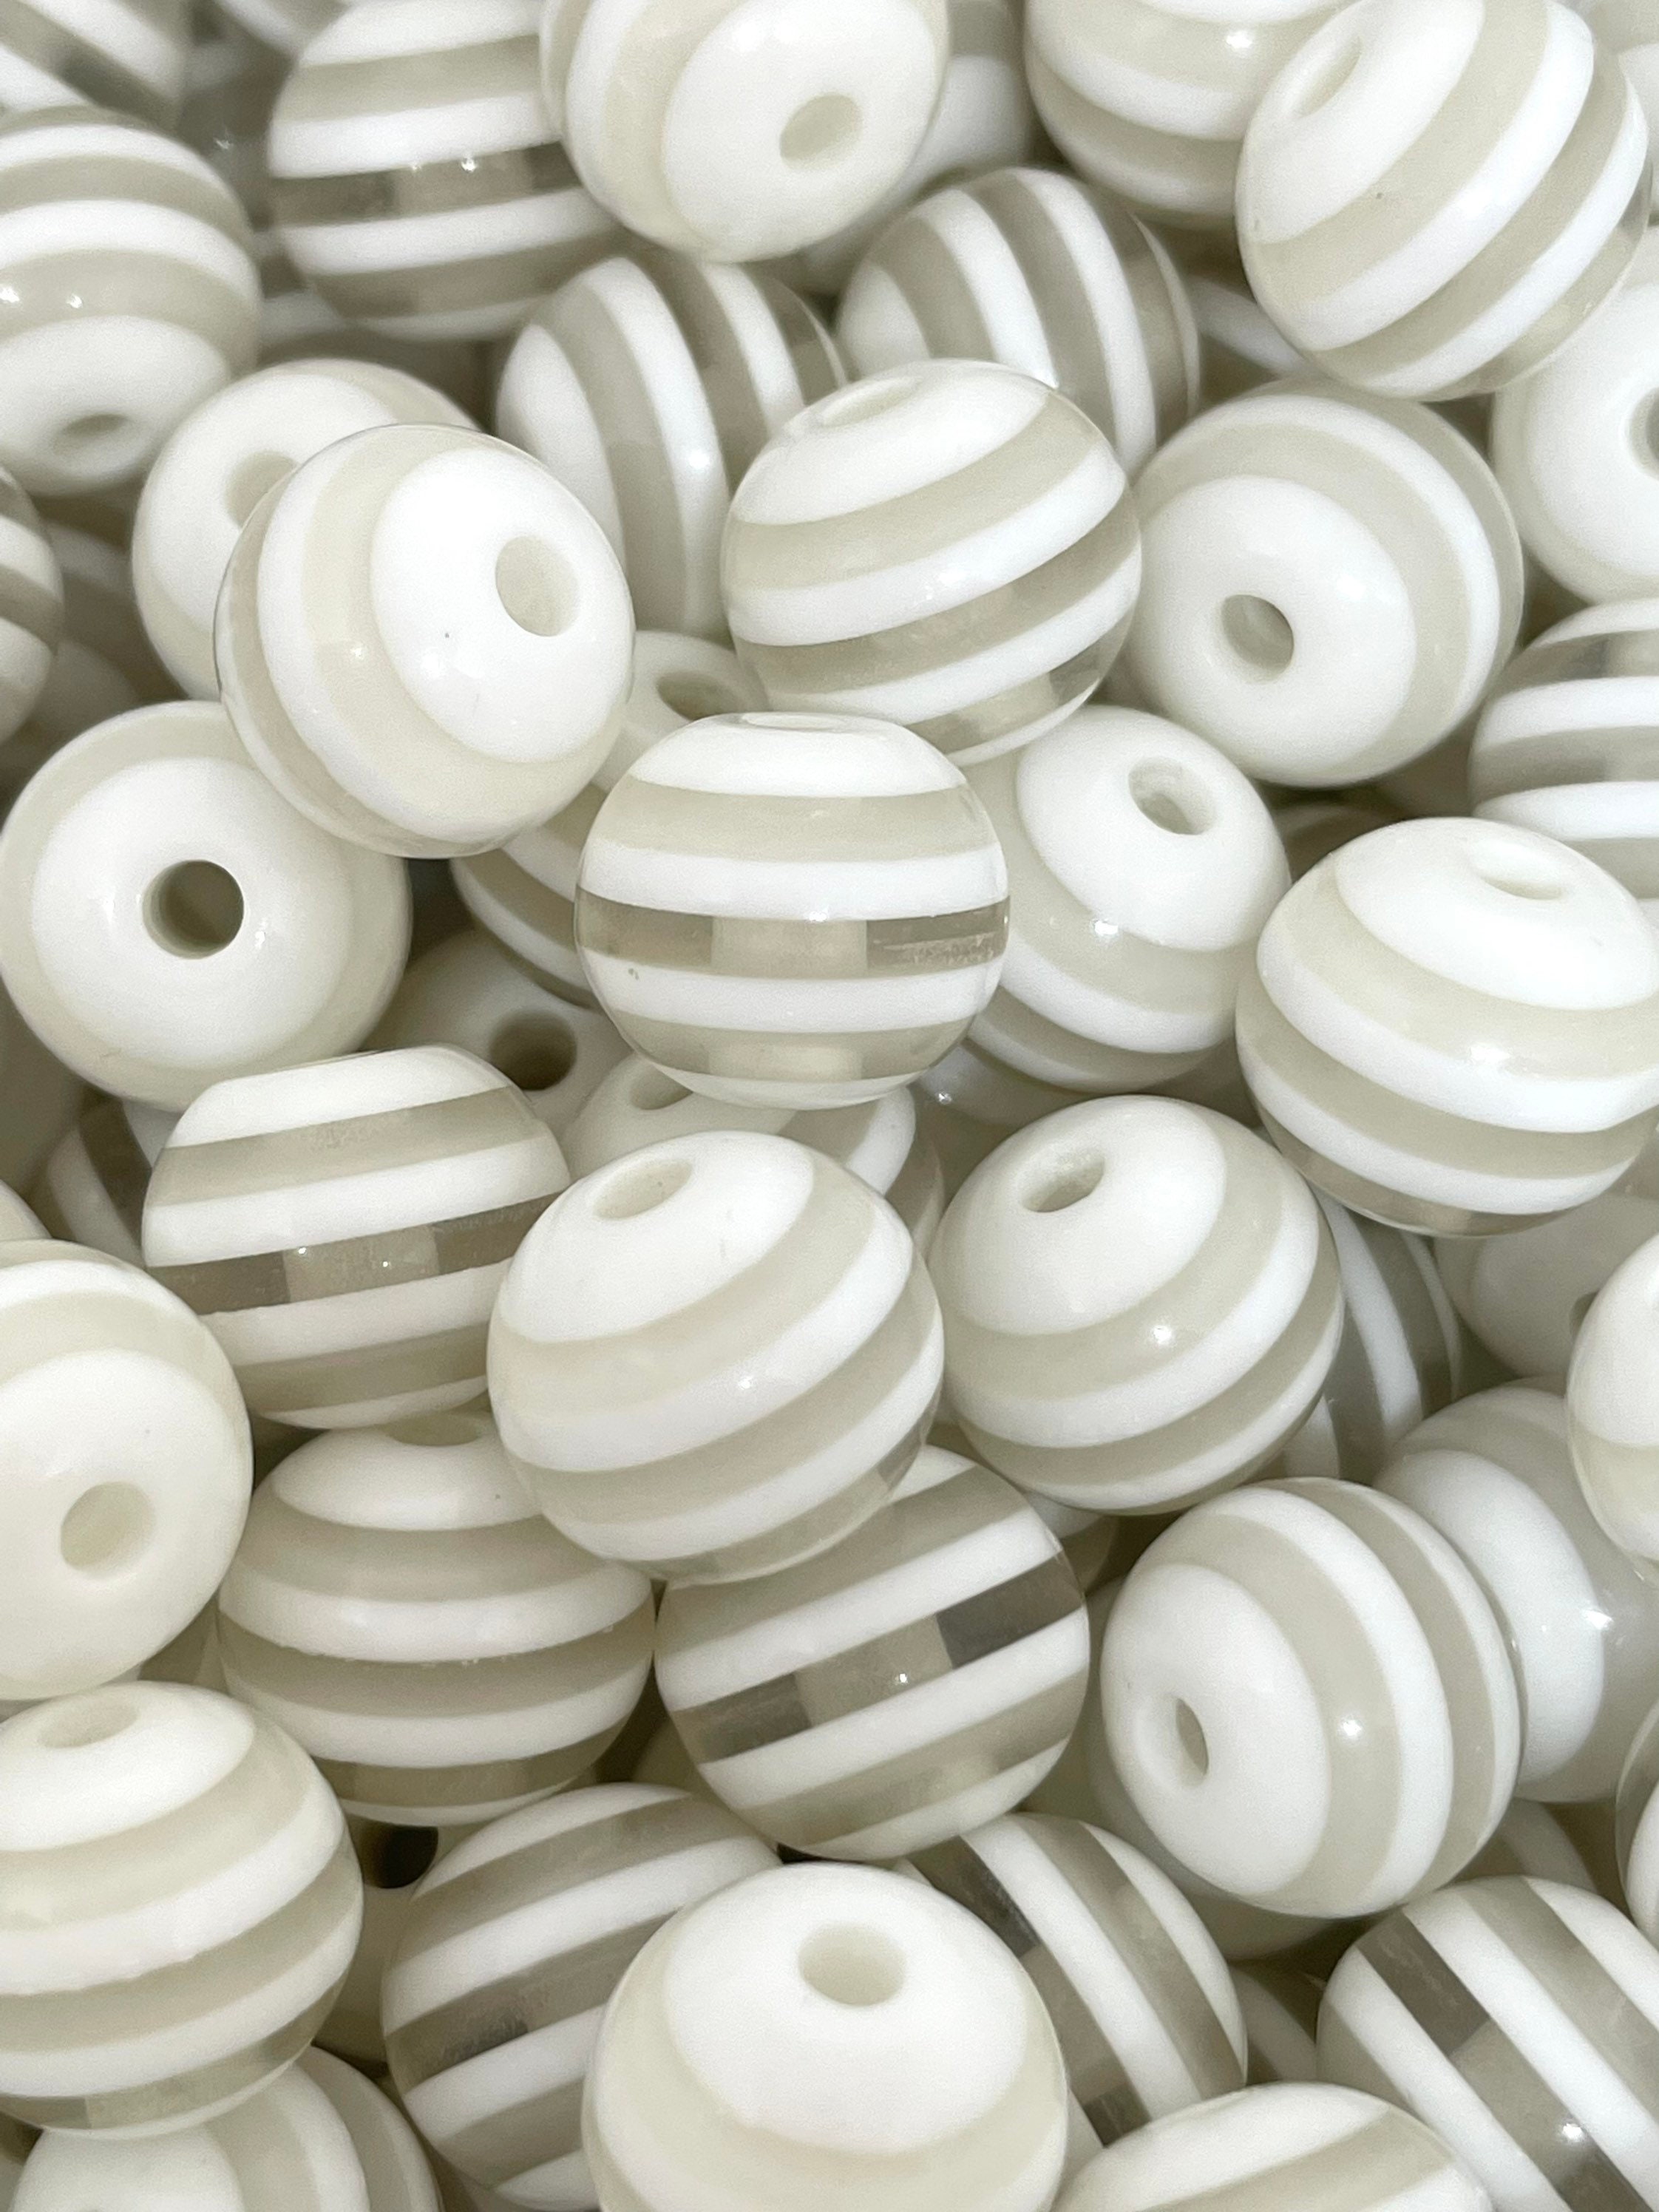 Black and White Beach Ball Beads, Black and White Striped Beads, Large  Chunky Round Beads for Jewelry Making, Chunky Jewelry, 20mm Beads 